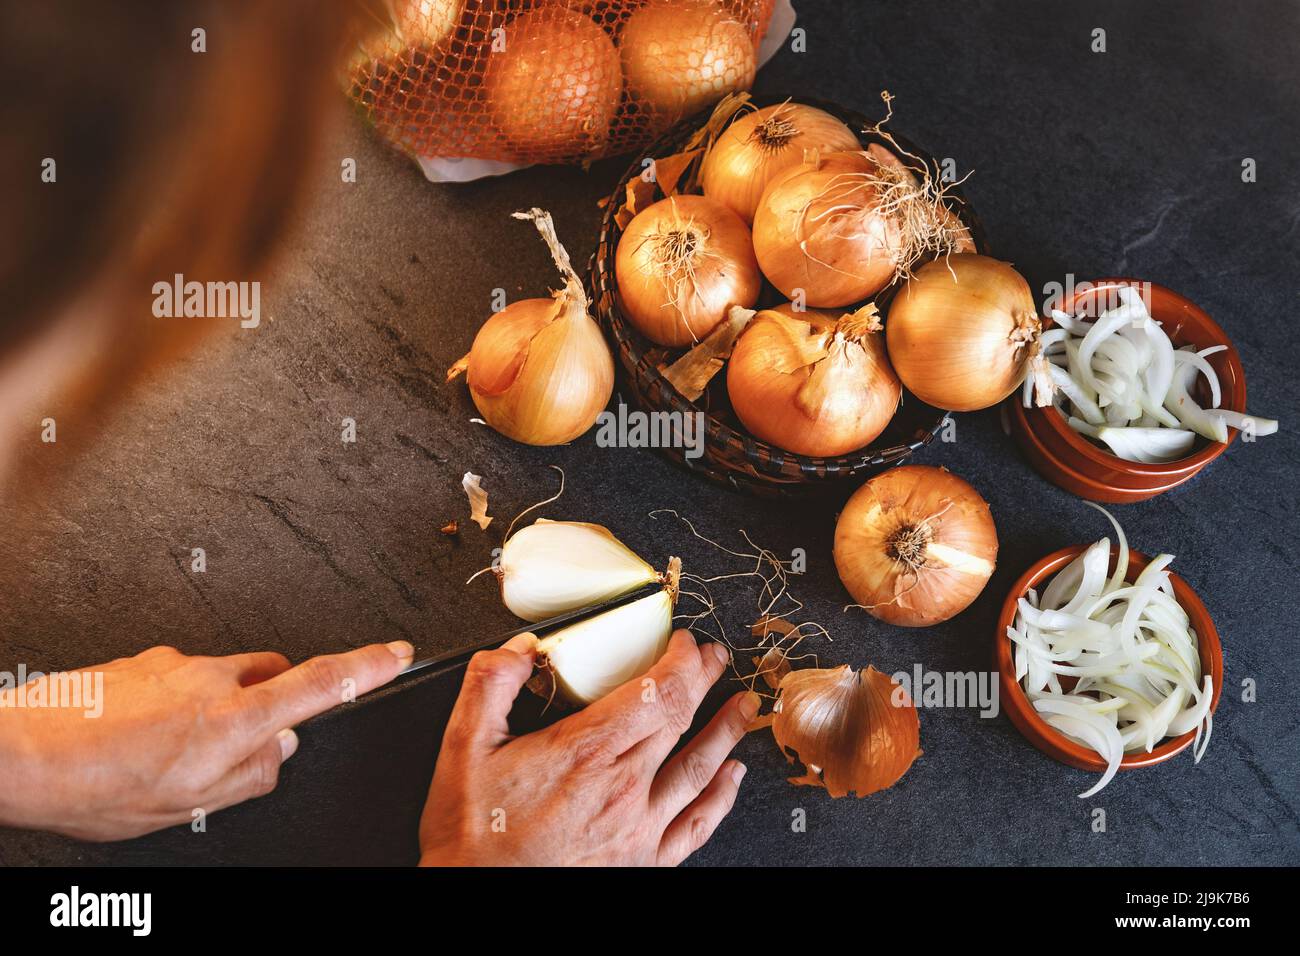 A lot of onions in a basket and plates on a dark and elegant dark textural background. Stock Photo